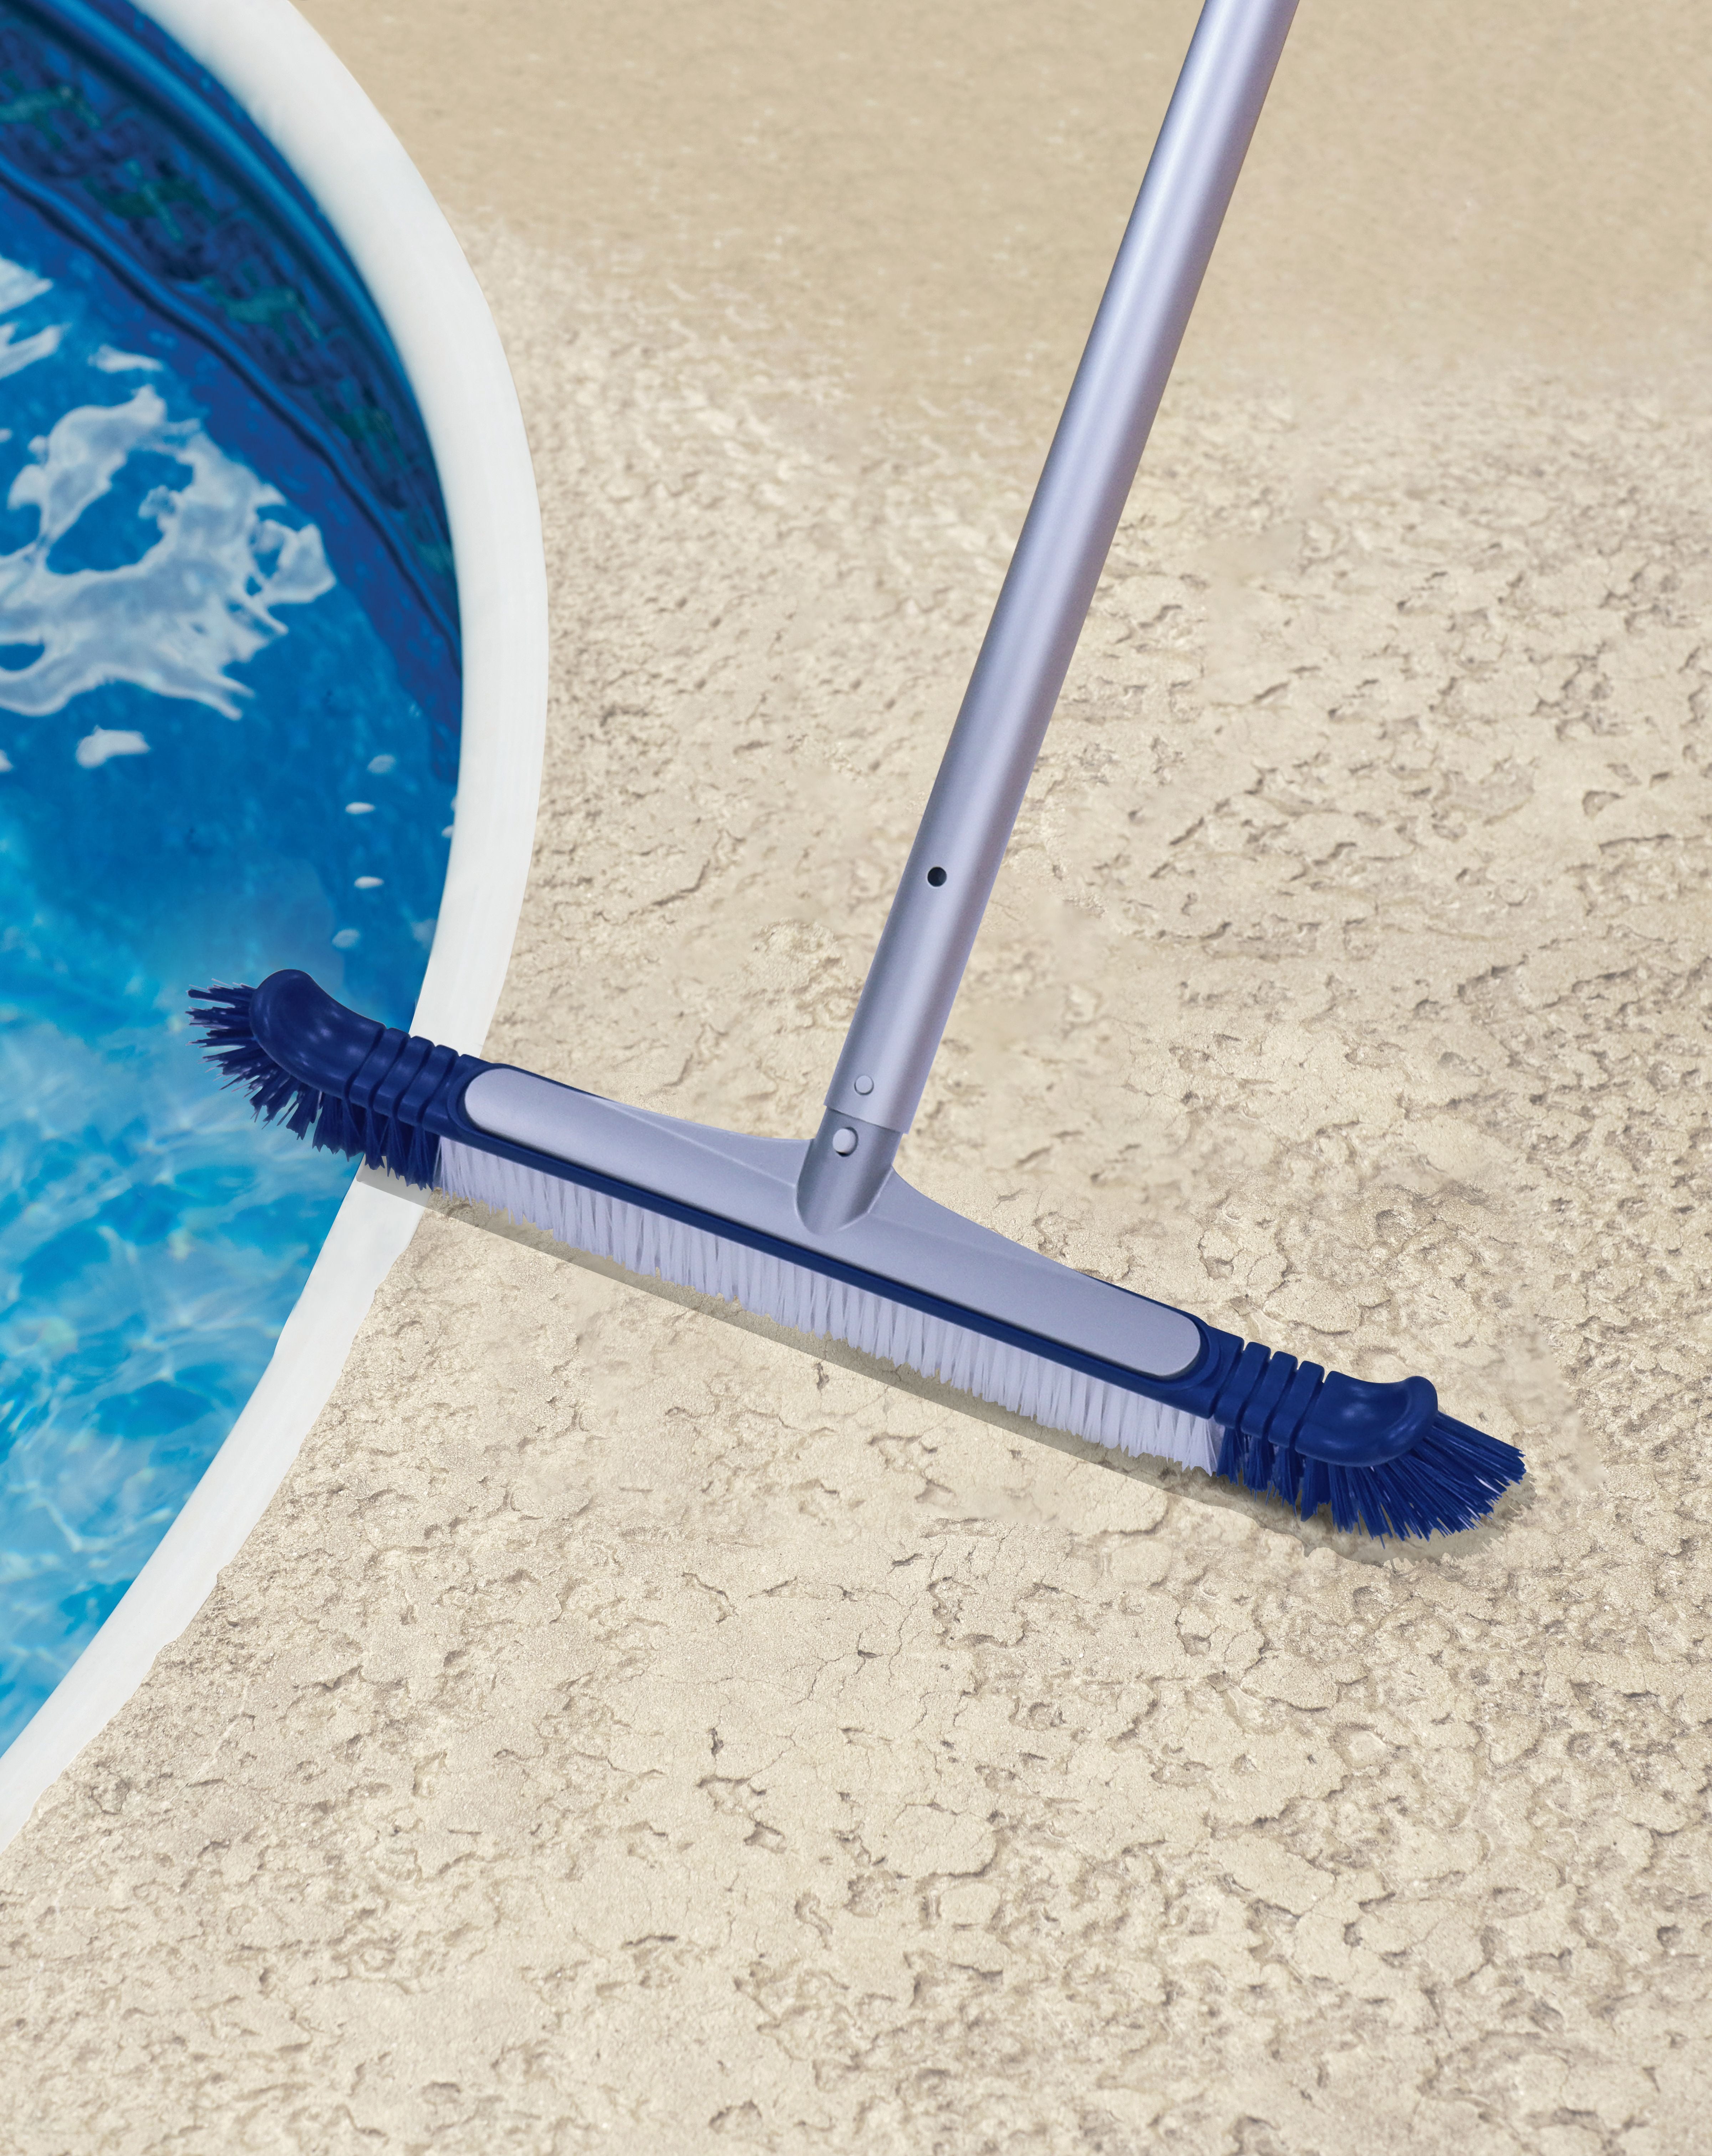 Poolmaster 20193 36 Aluminum-Back Brush - Commercial Collection